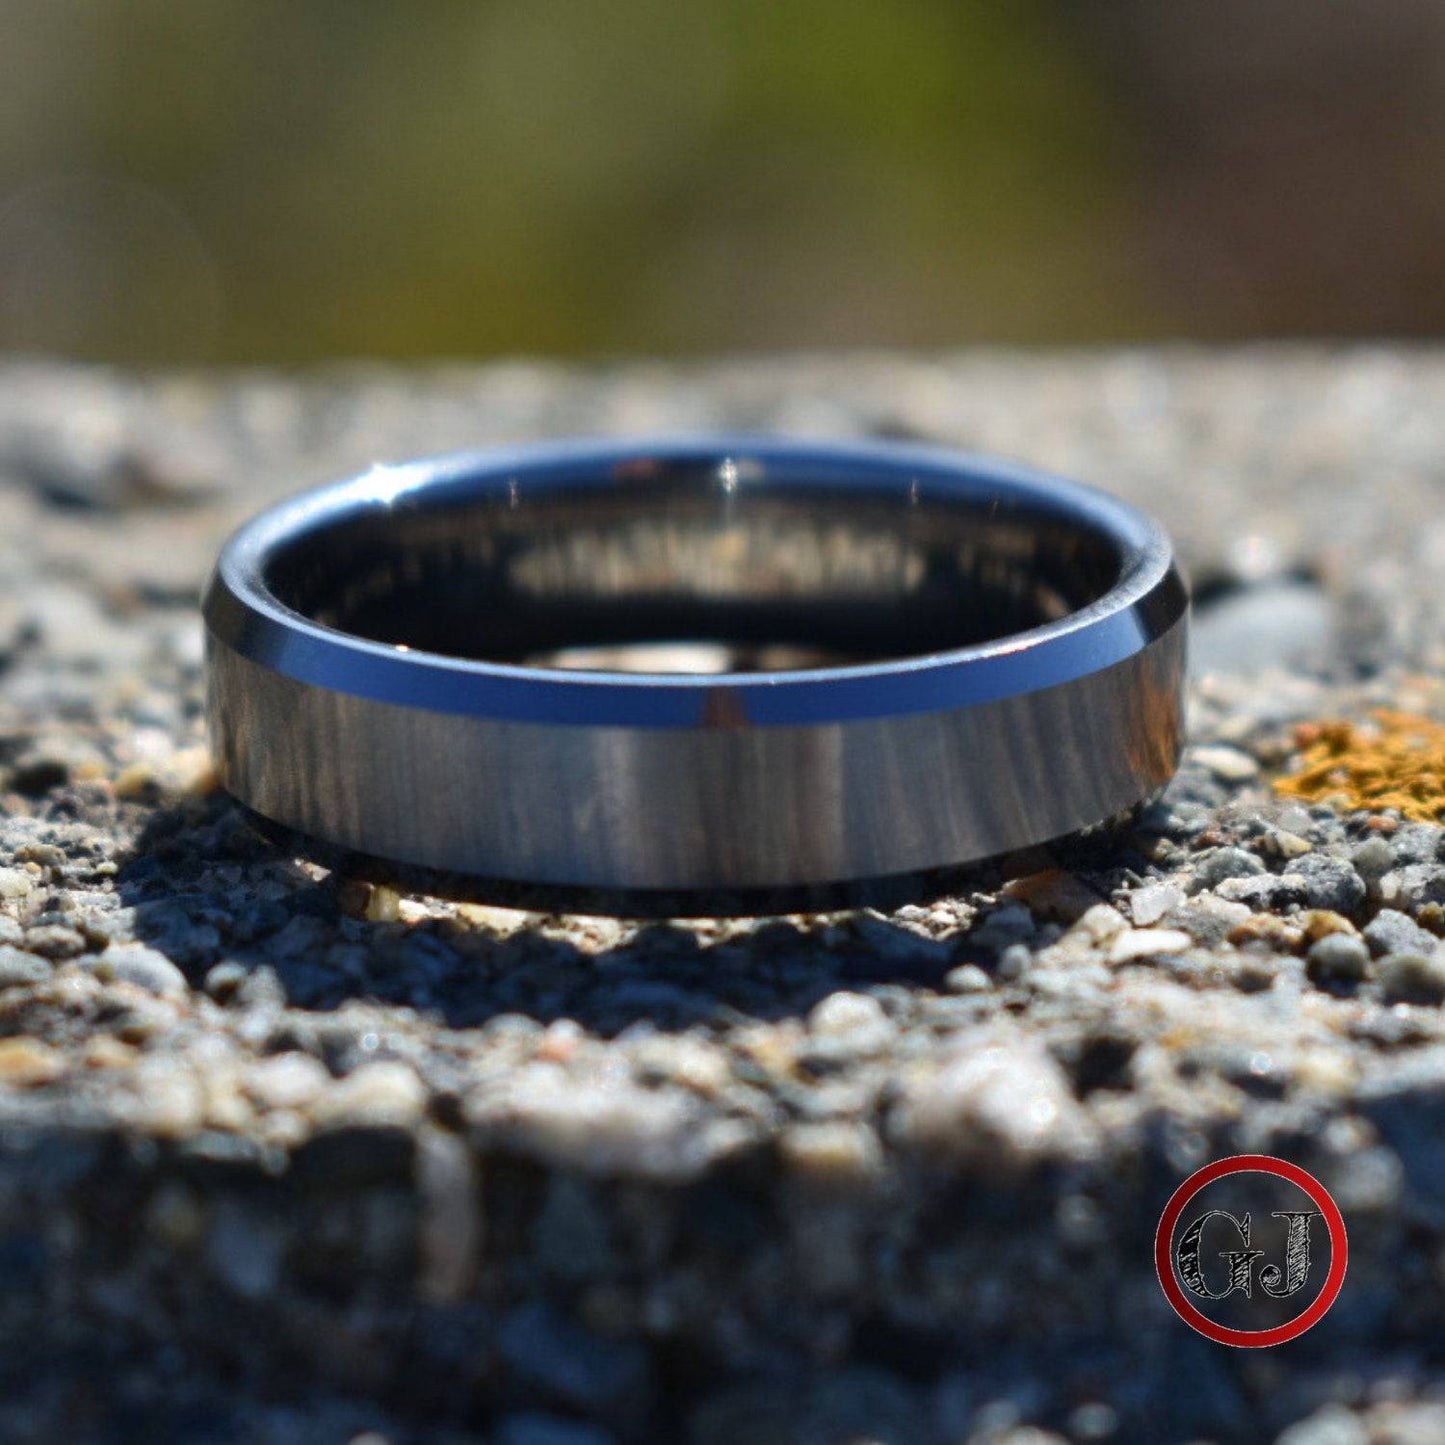 Tungsten Ring 6mm Brushed Silver with Beveled Edge - Tungsten Titans